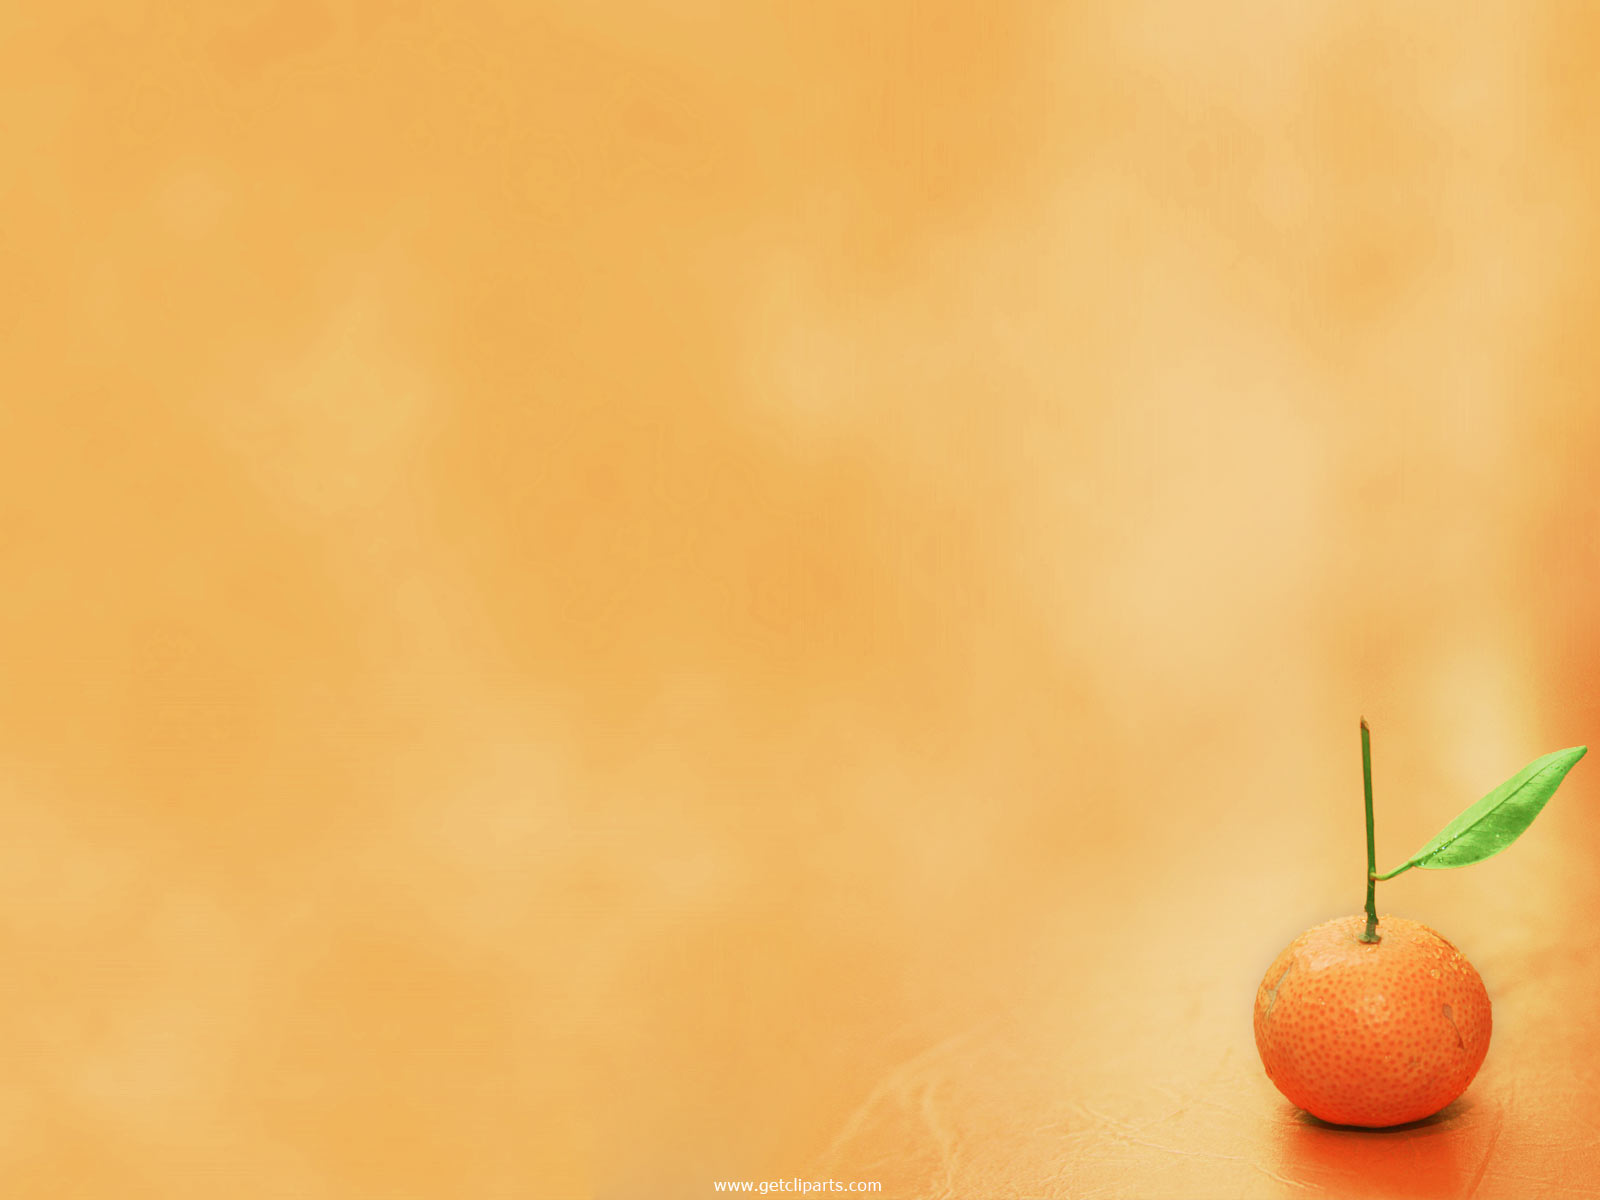 Fruit Background Wallpaper For Powerpoint Presentations